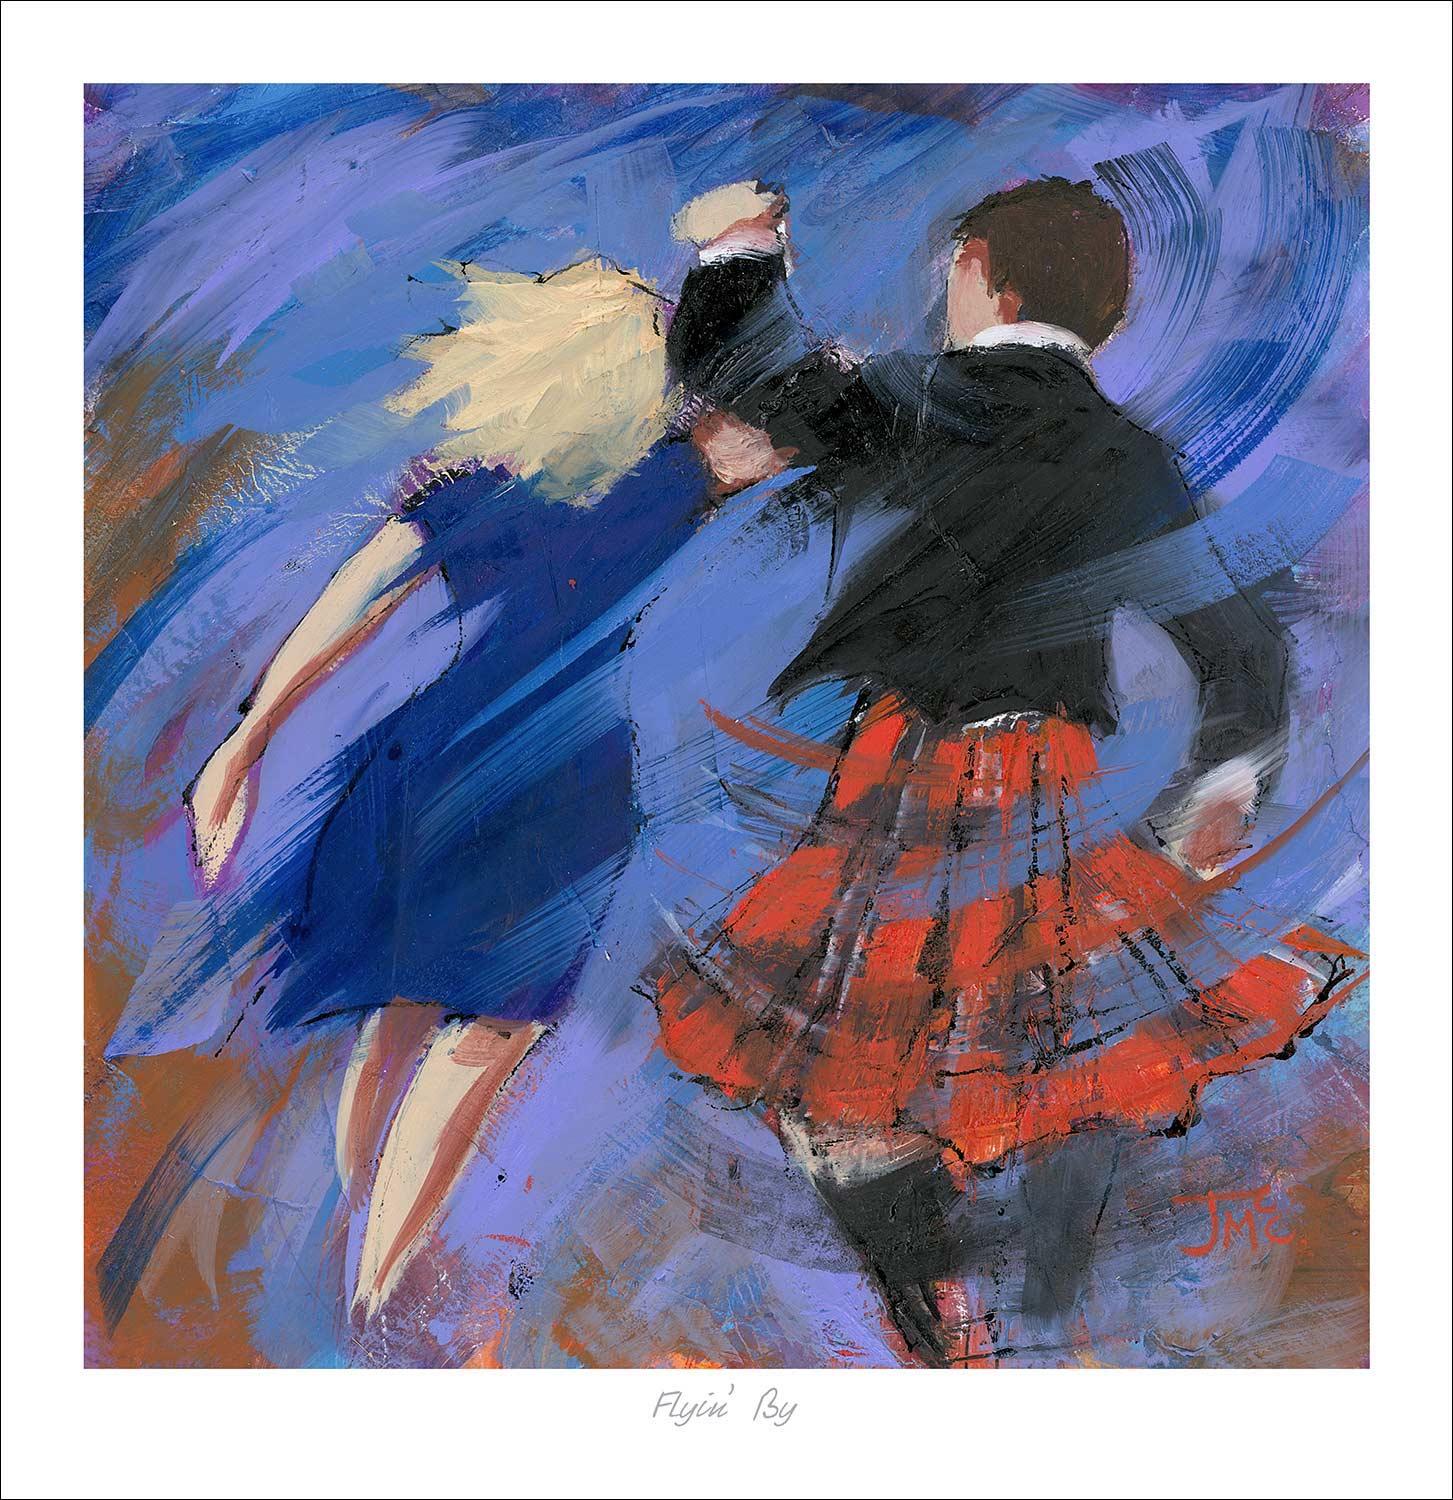 Flyin' By Art Print from an original painting by artist Janet McCrorie